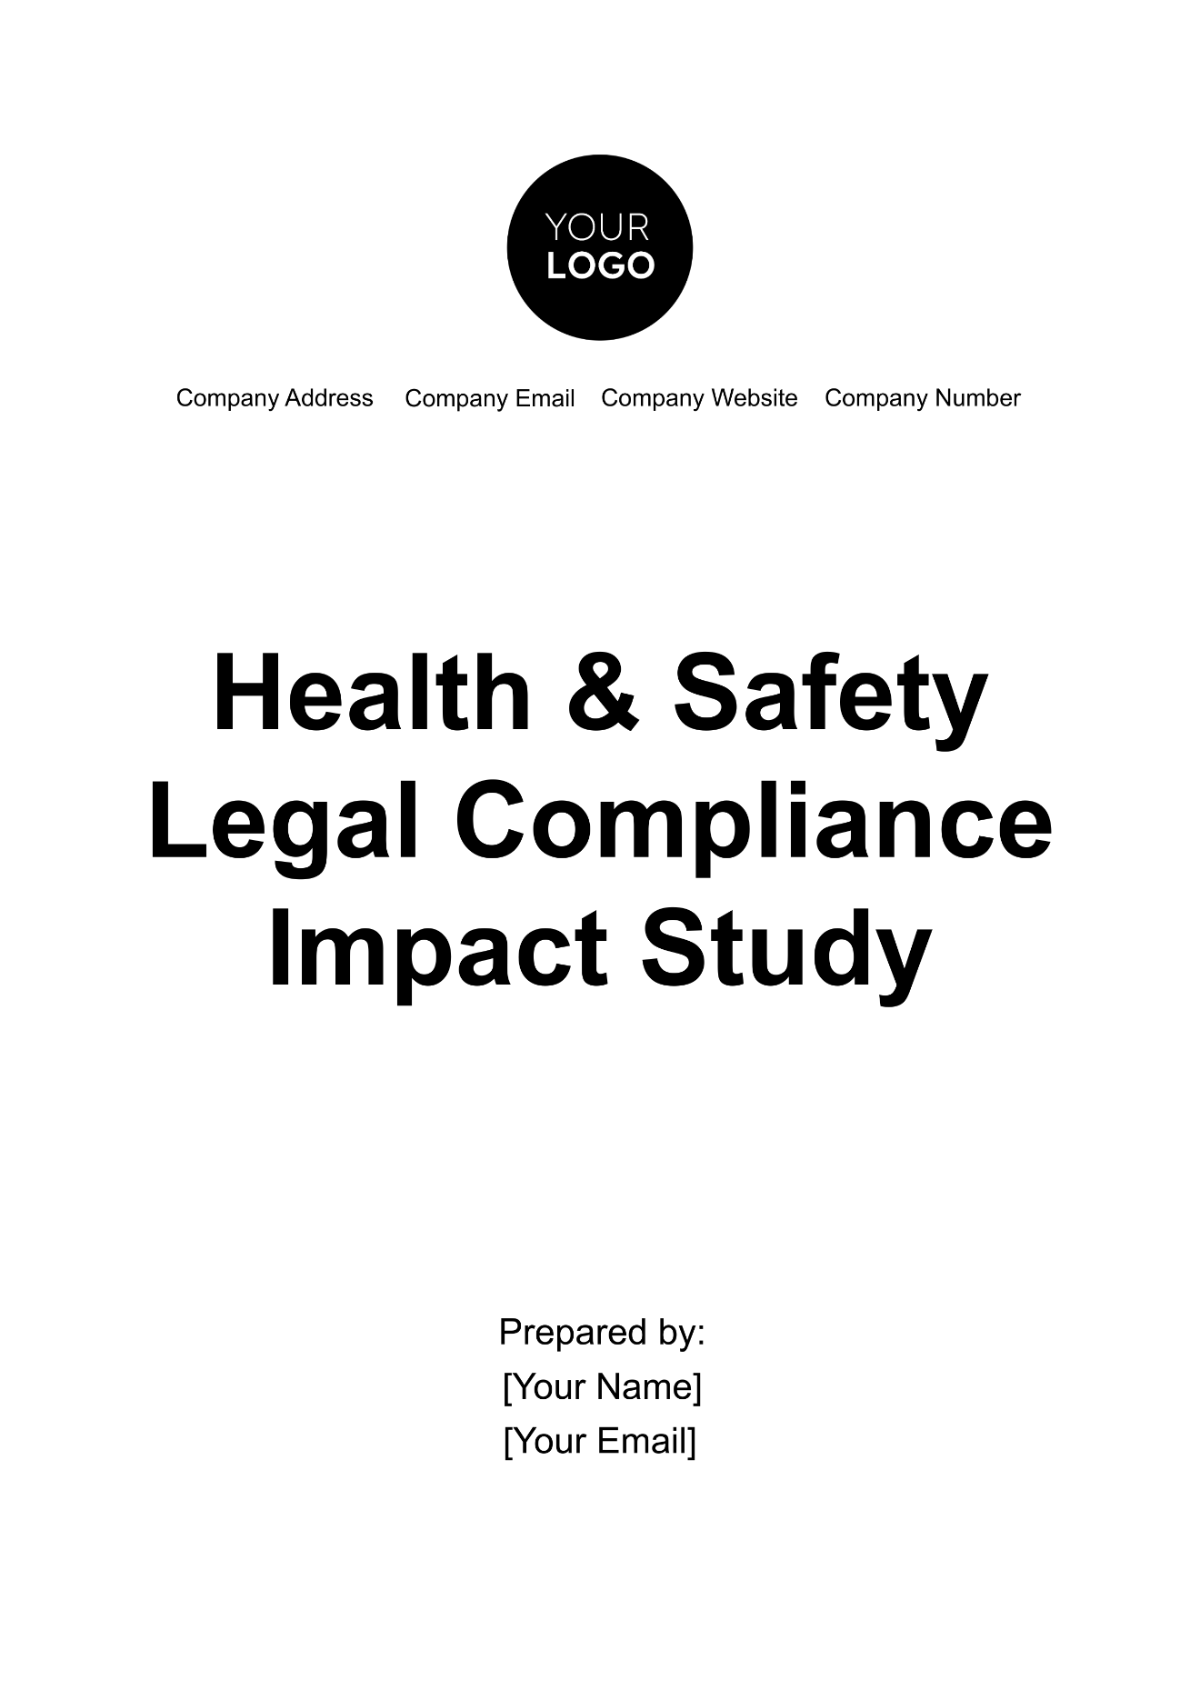 Health & Safety Legal Compliance Impact Study Template